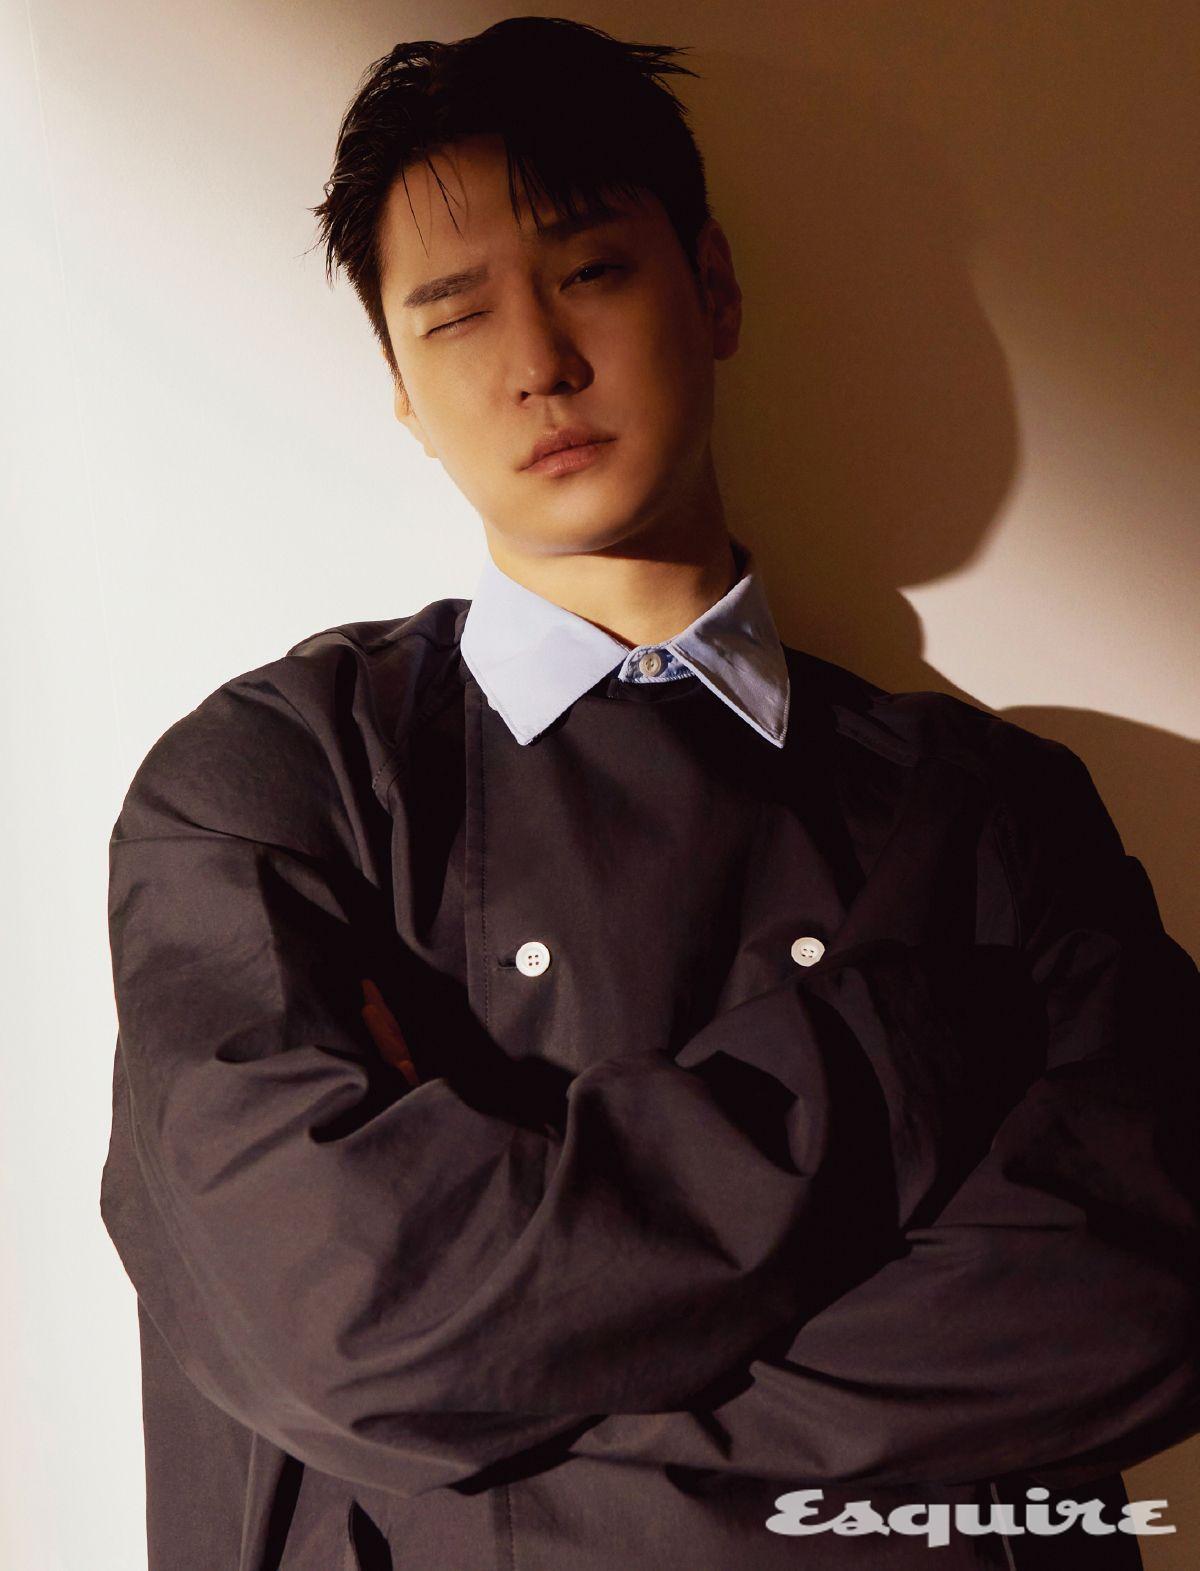 Go Kyung Pyo Shares Insight On His Mental Wellbeing, Public Image, And Stepping Into Variety Shows